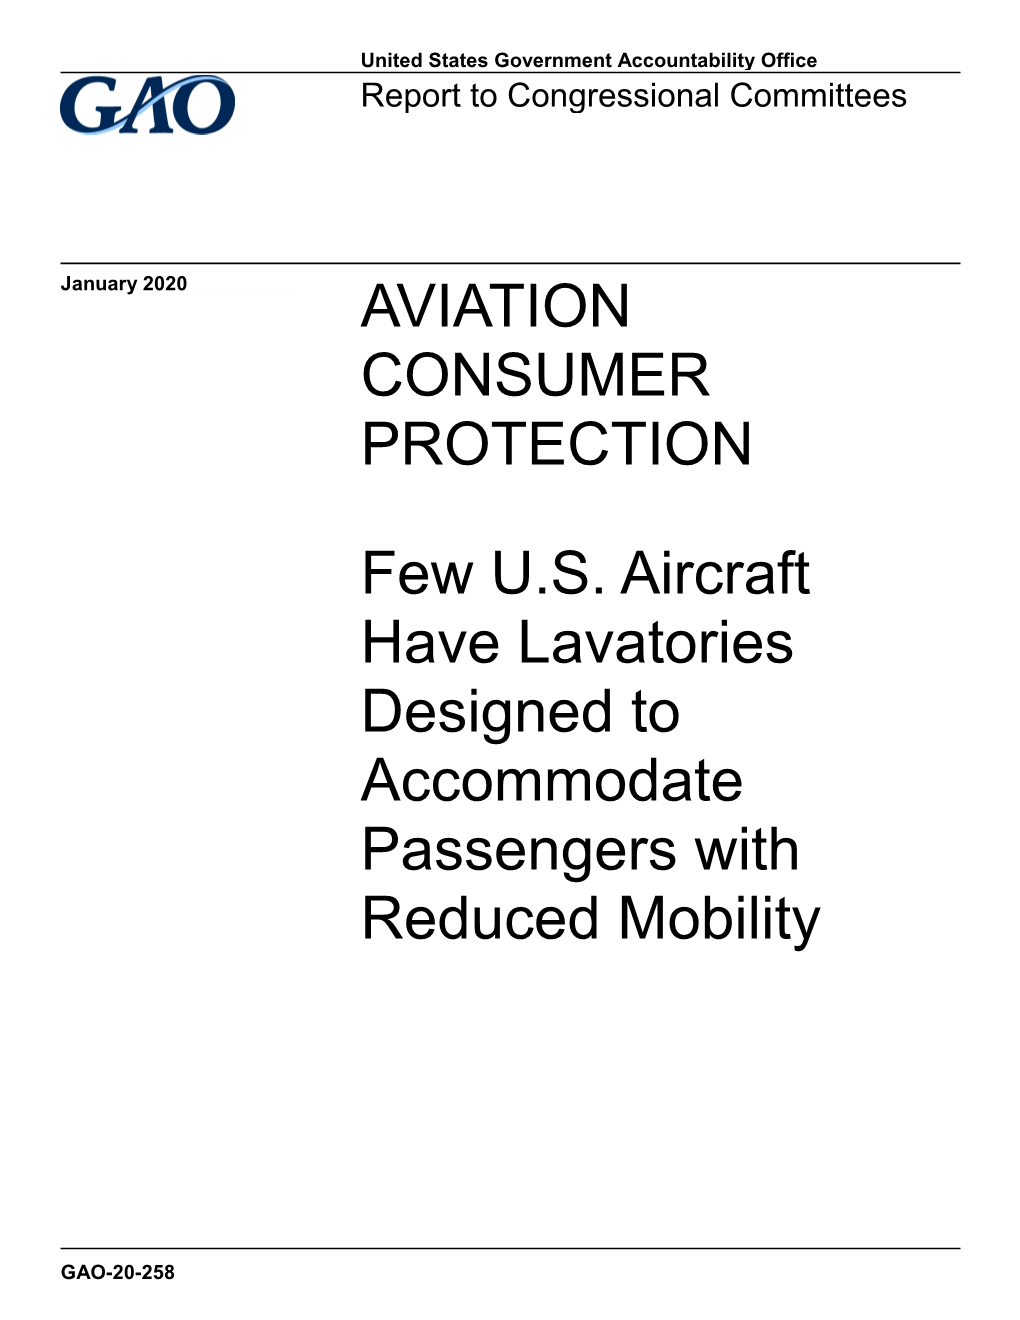 Few US Aircraft Have Lavatories Designed to Accommodate Passengers with Reduced Mobi